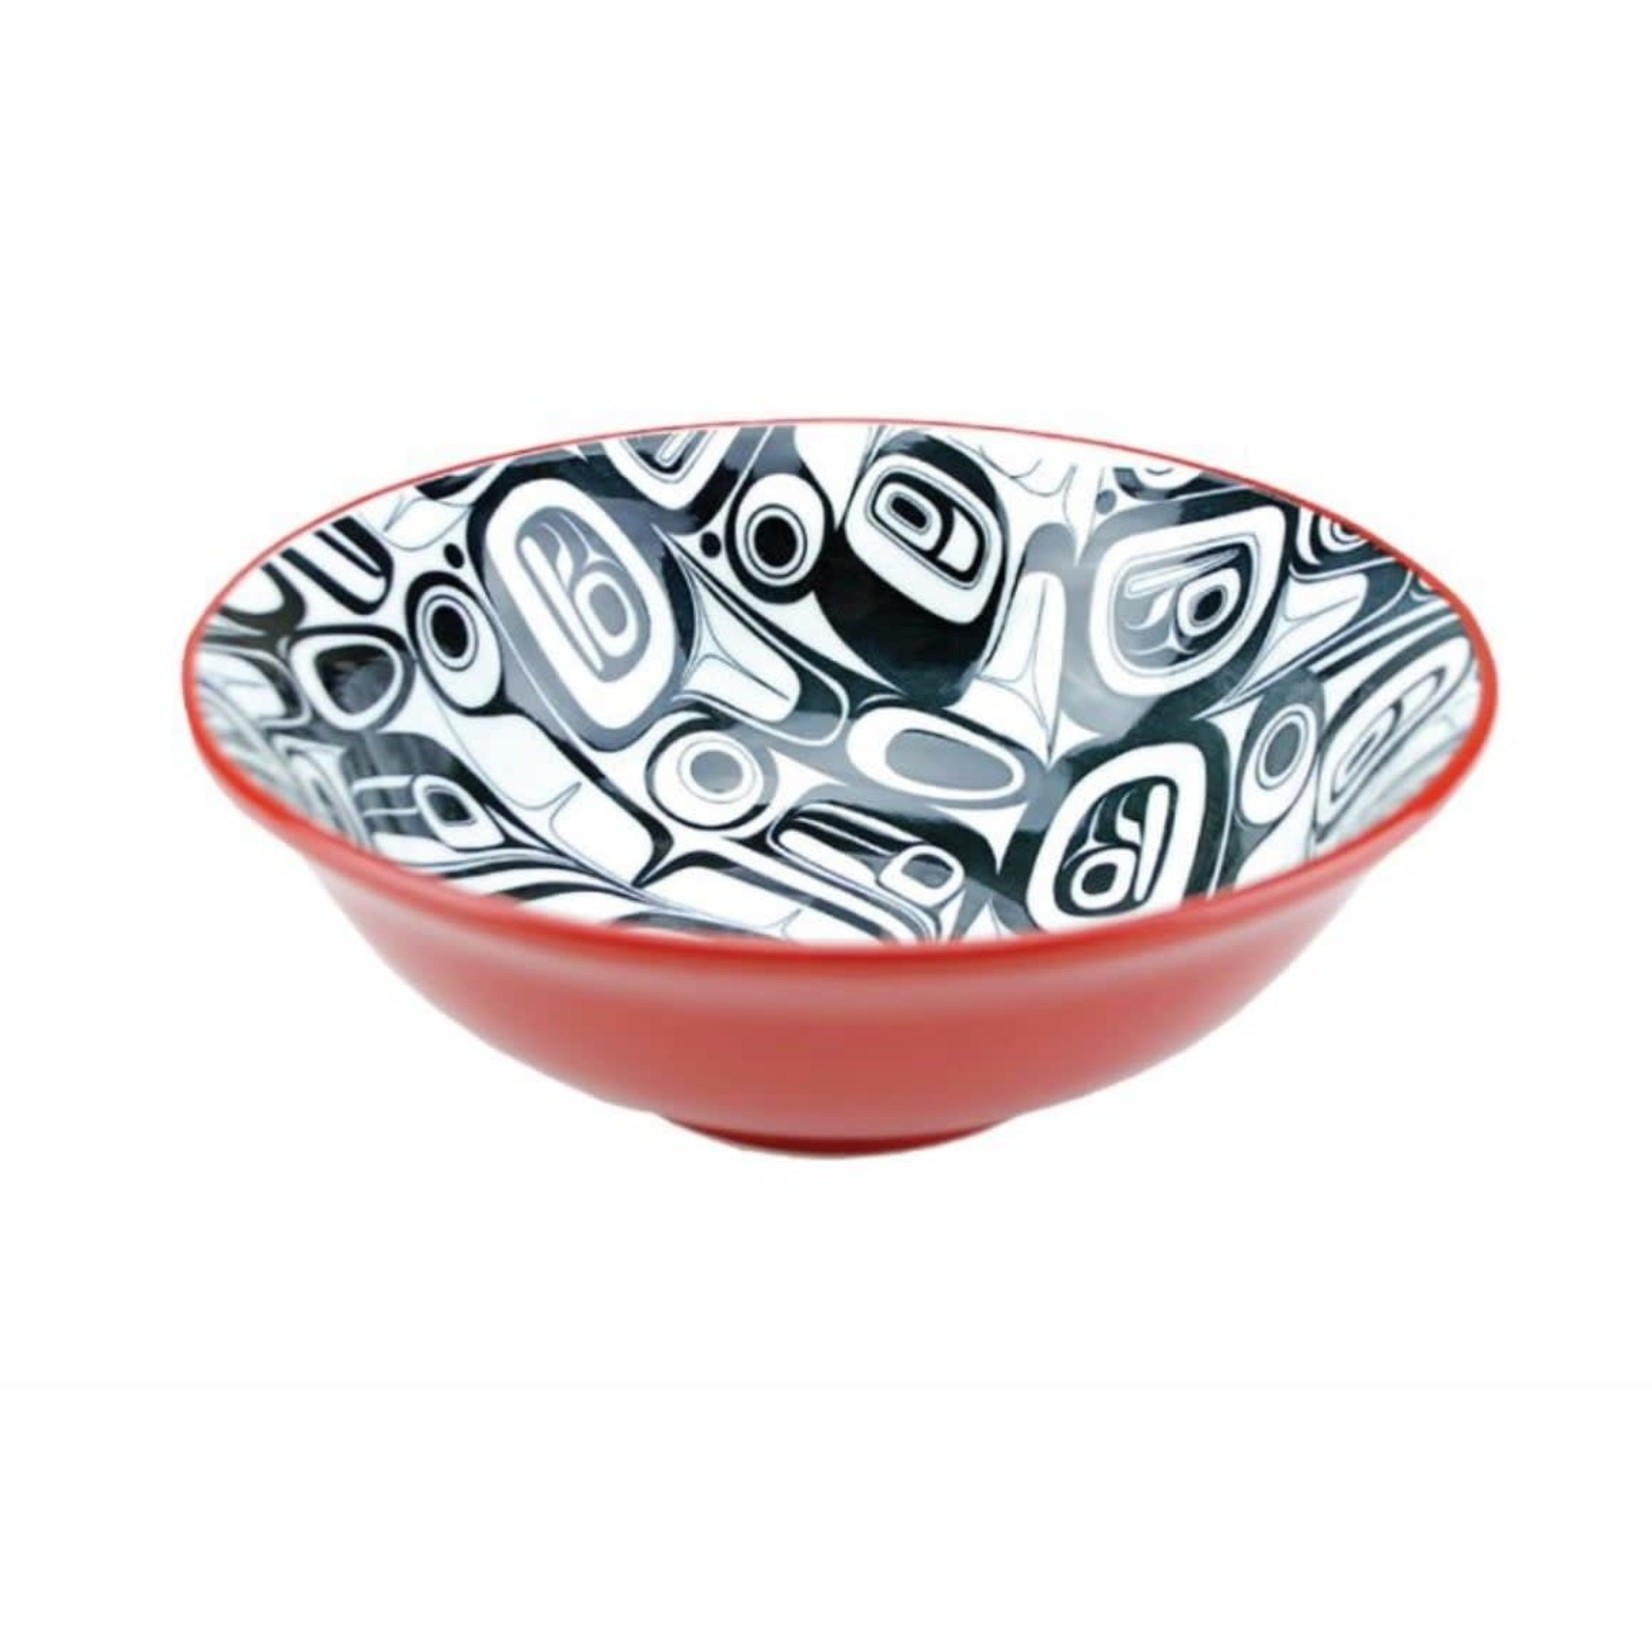 PANABO KELLY ROBINSON Raven Bowl Extra Large 26cm - Red / Black